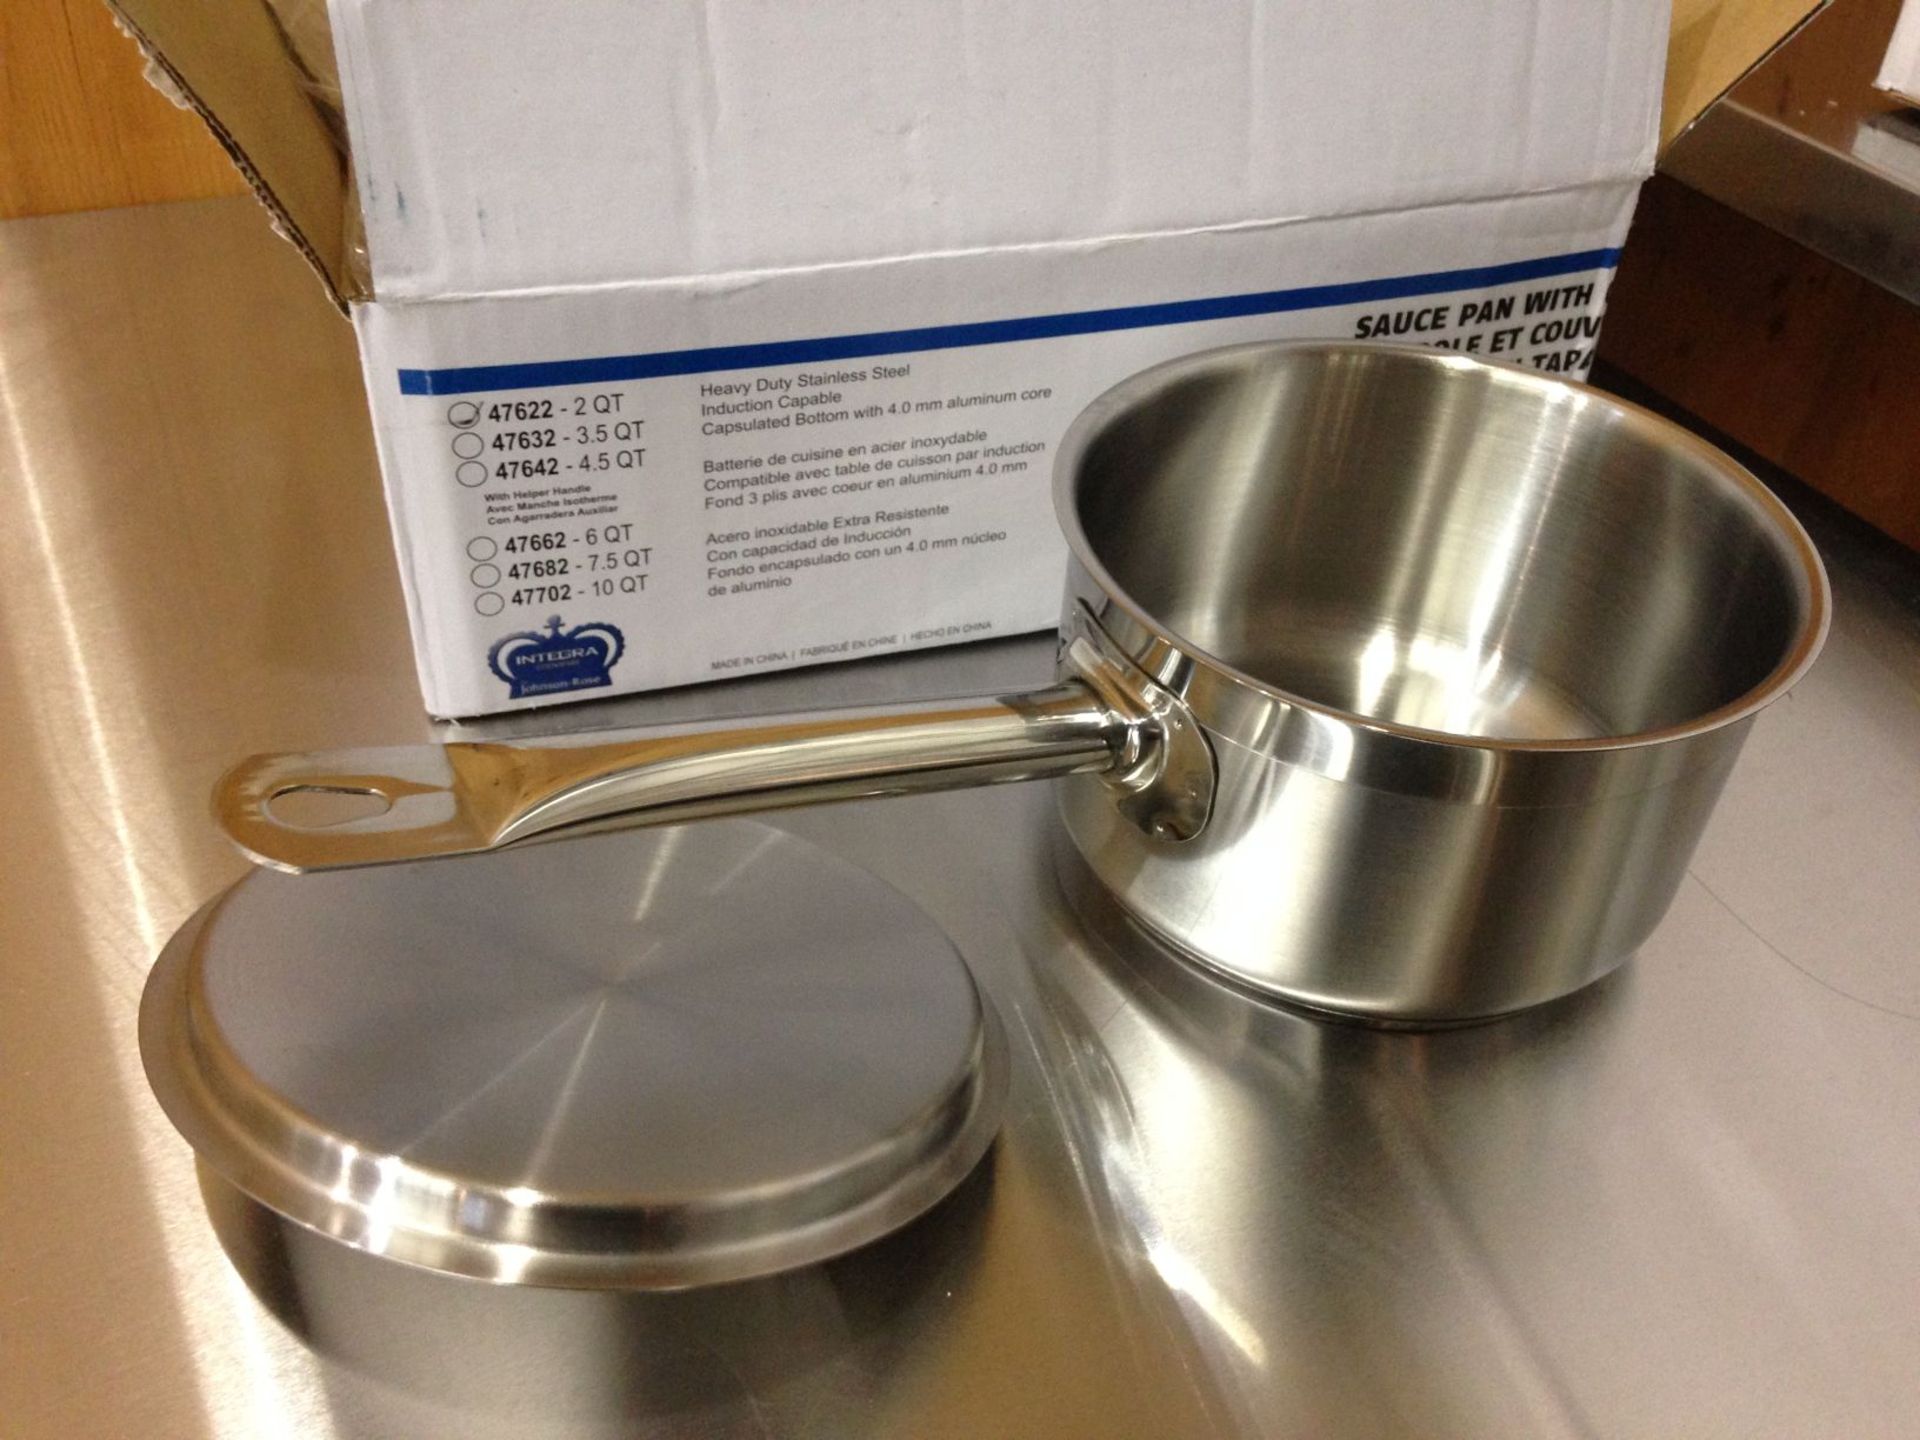 2qt Heavy Duty Sauce Pan Induction Capable - Image 2 of 2